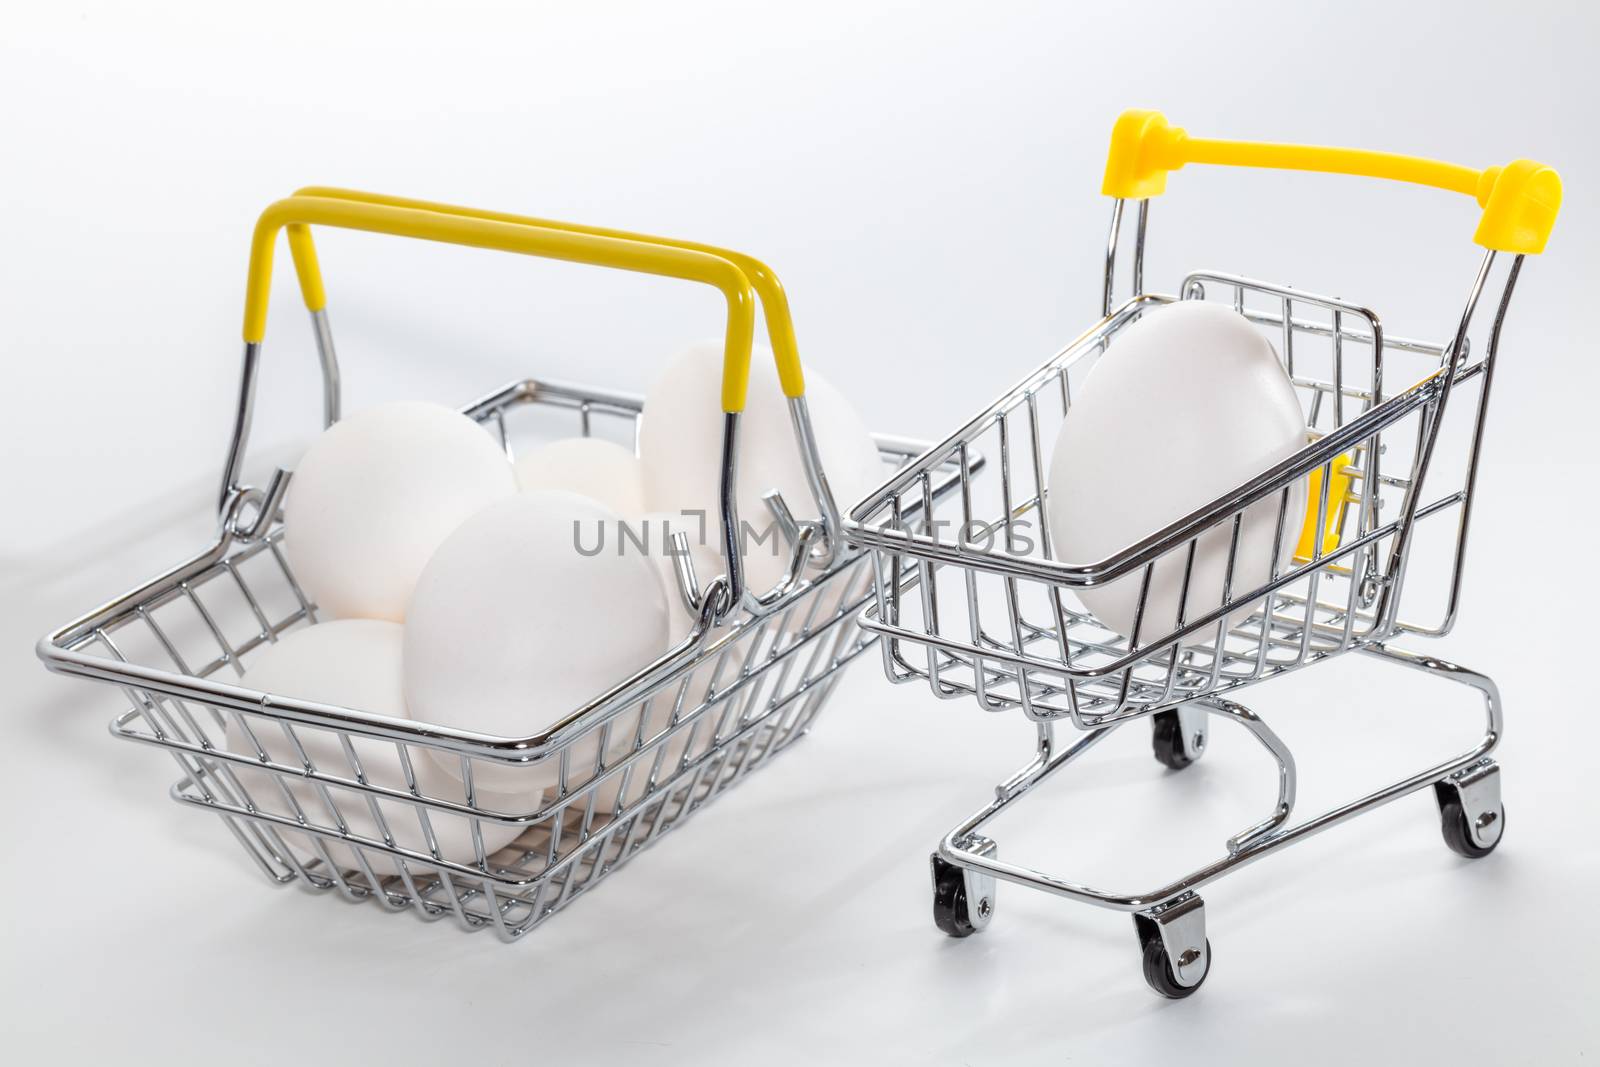 Fresh eggs in a shopping cart and a basket next to it. Eggs in a basked slightly out of focus. High angle view. Shopping, purchasing, and food delivery concept. White background. Close up shot. Isolated.